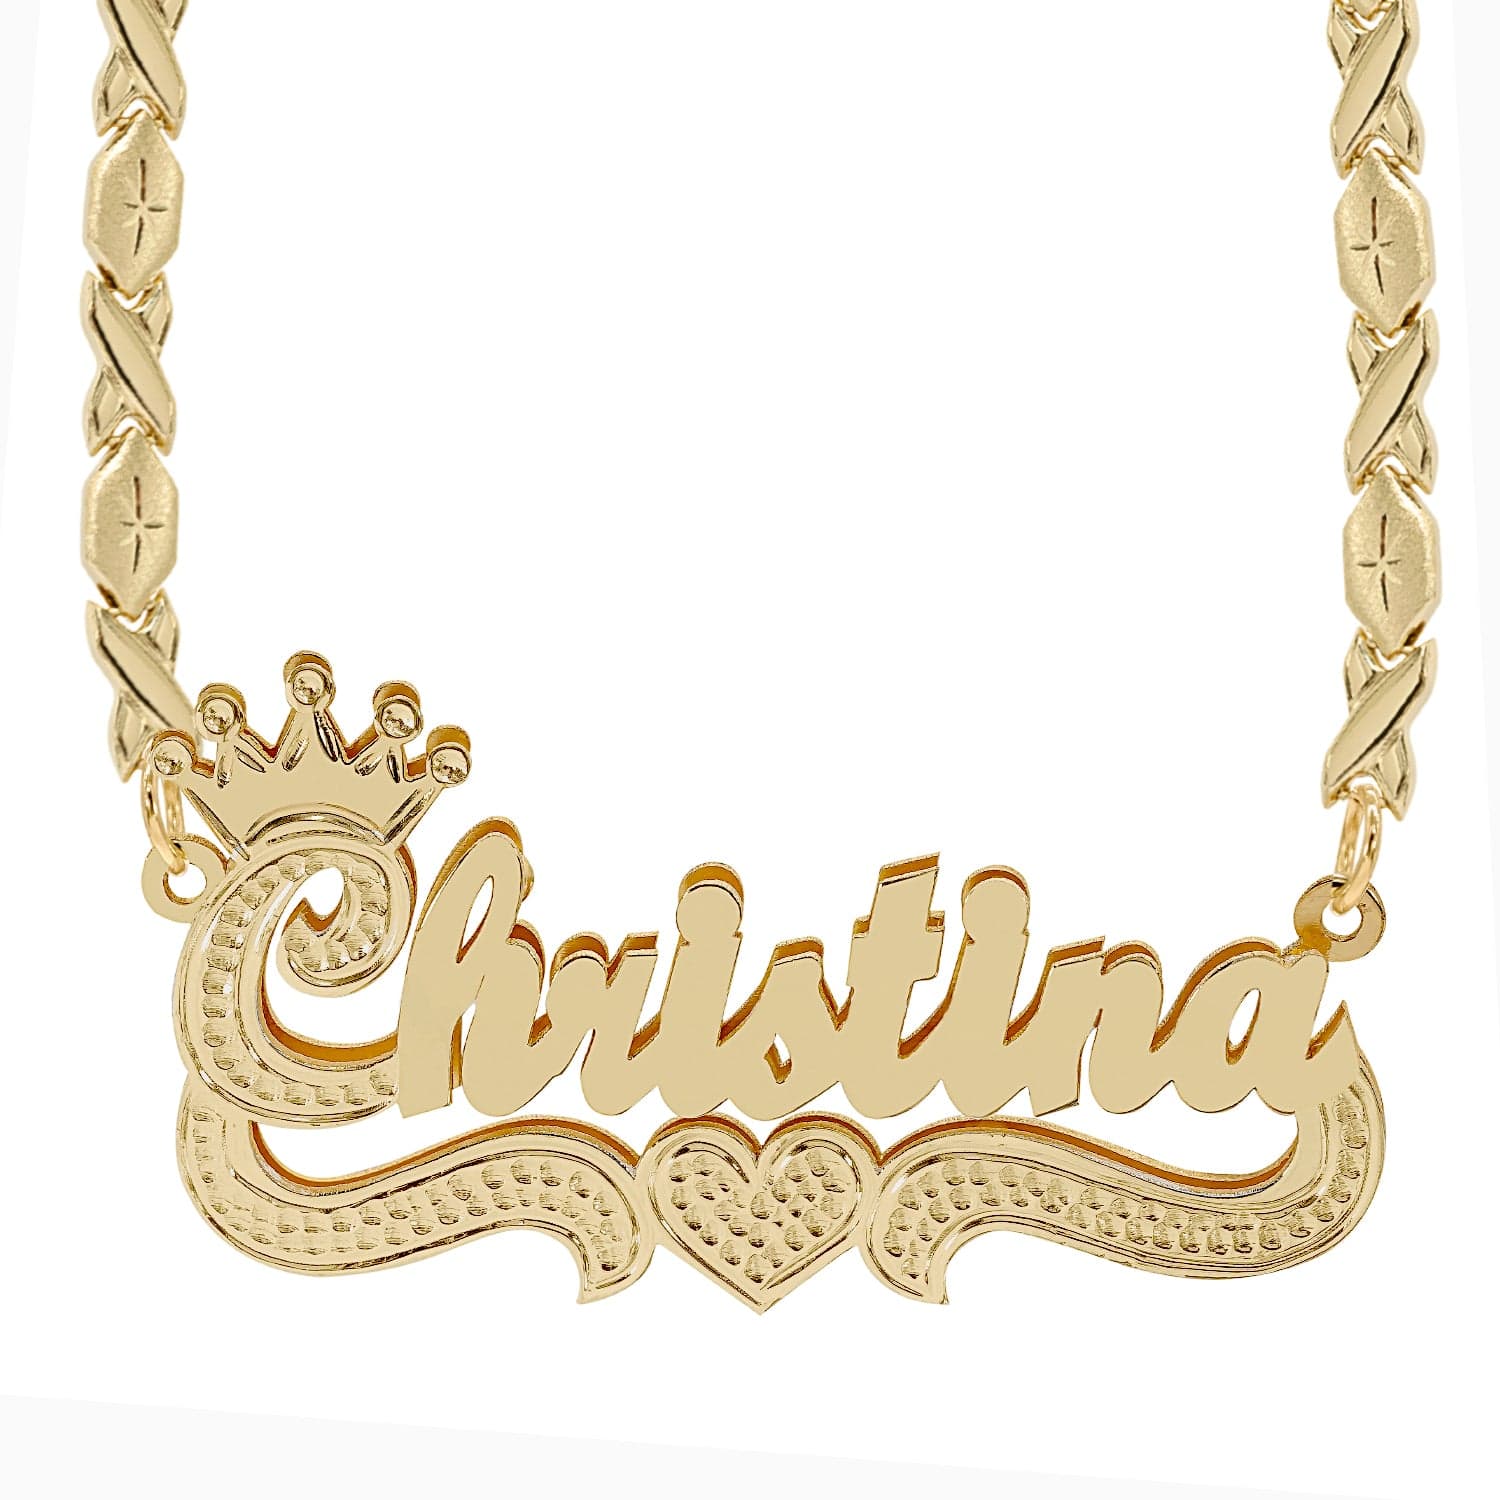 Two-Tone Sterling Silver / Xoxo Chain Double Plated Name Necklace "Christina" with Xoxo chain